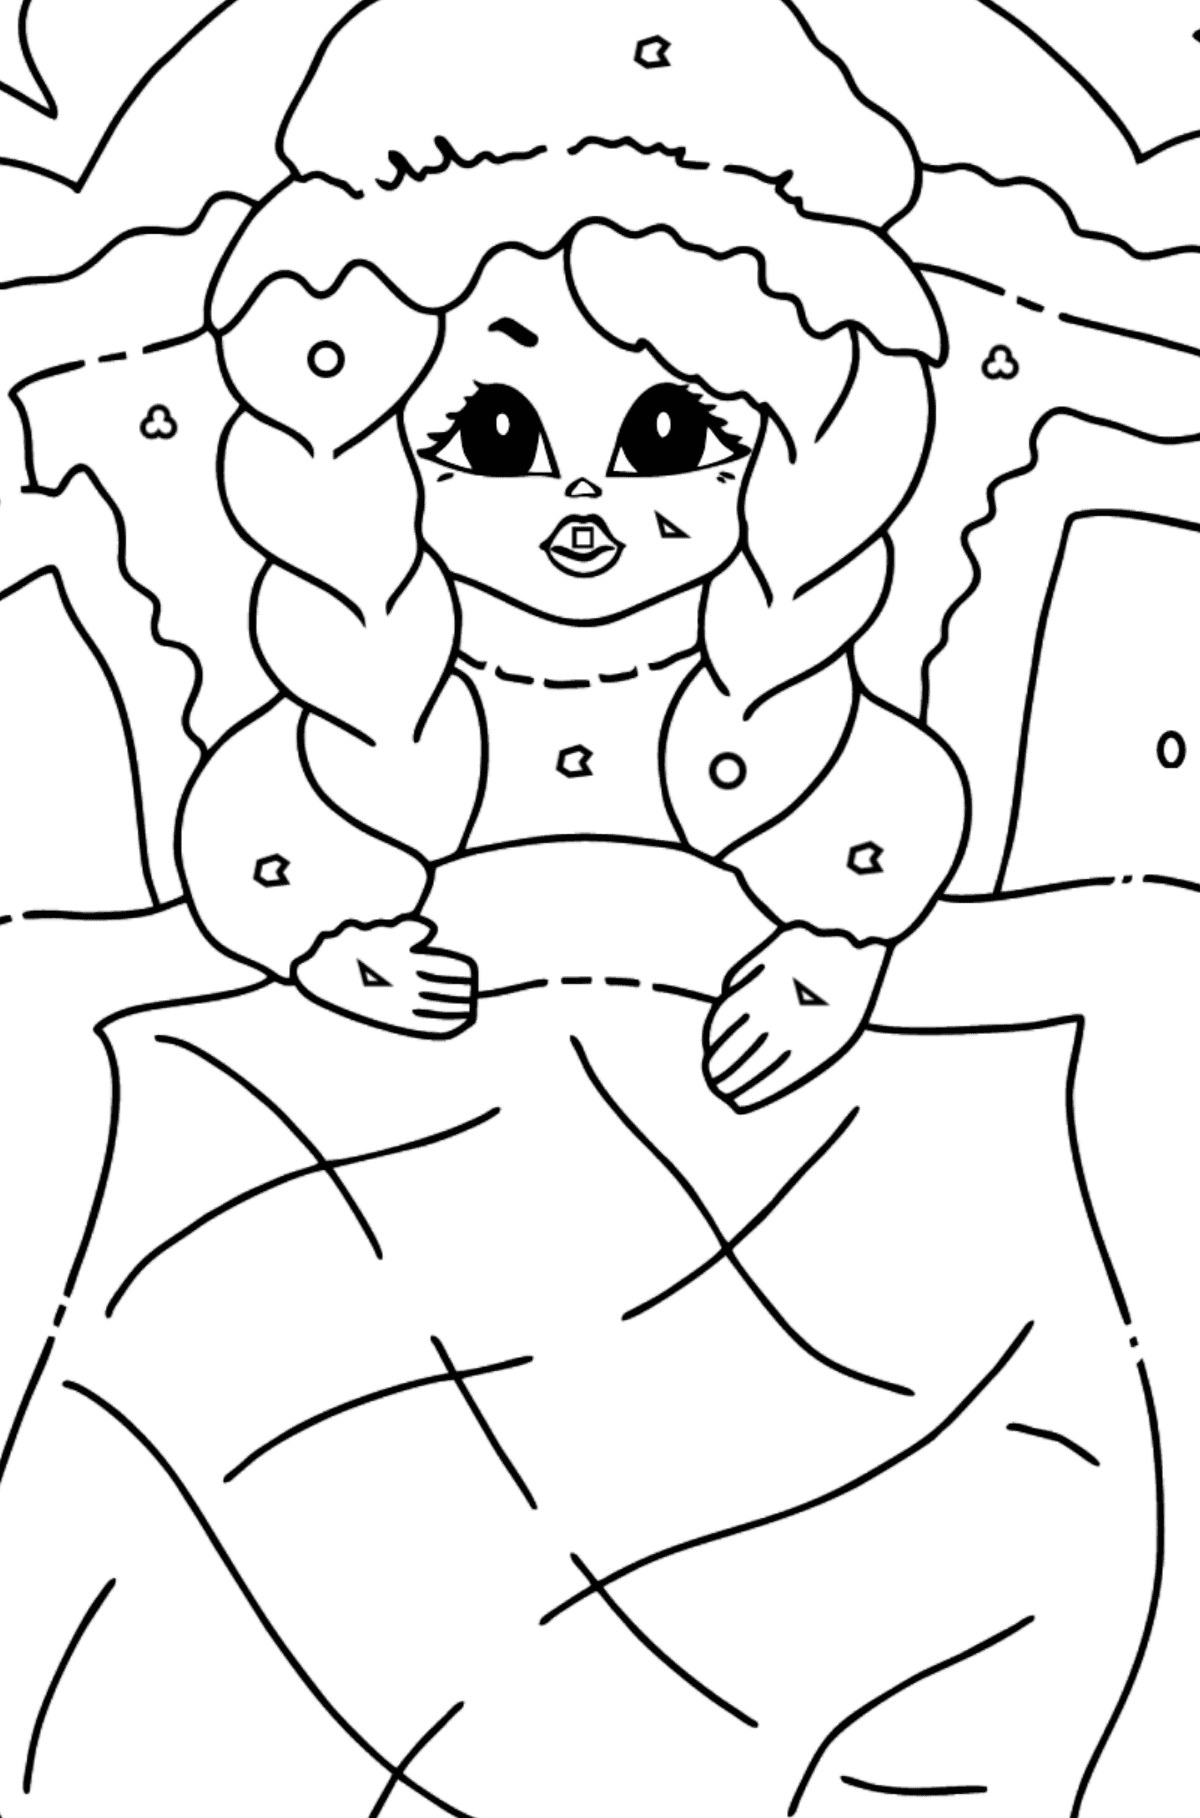 Coloring Picture - A Princess in Bed - Coloring by Geometric Shapes for Kids